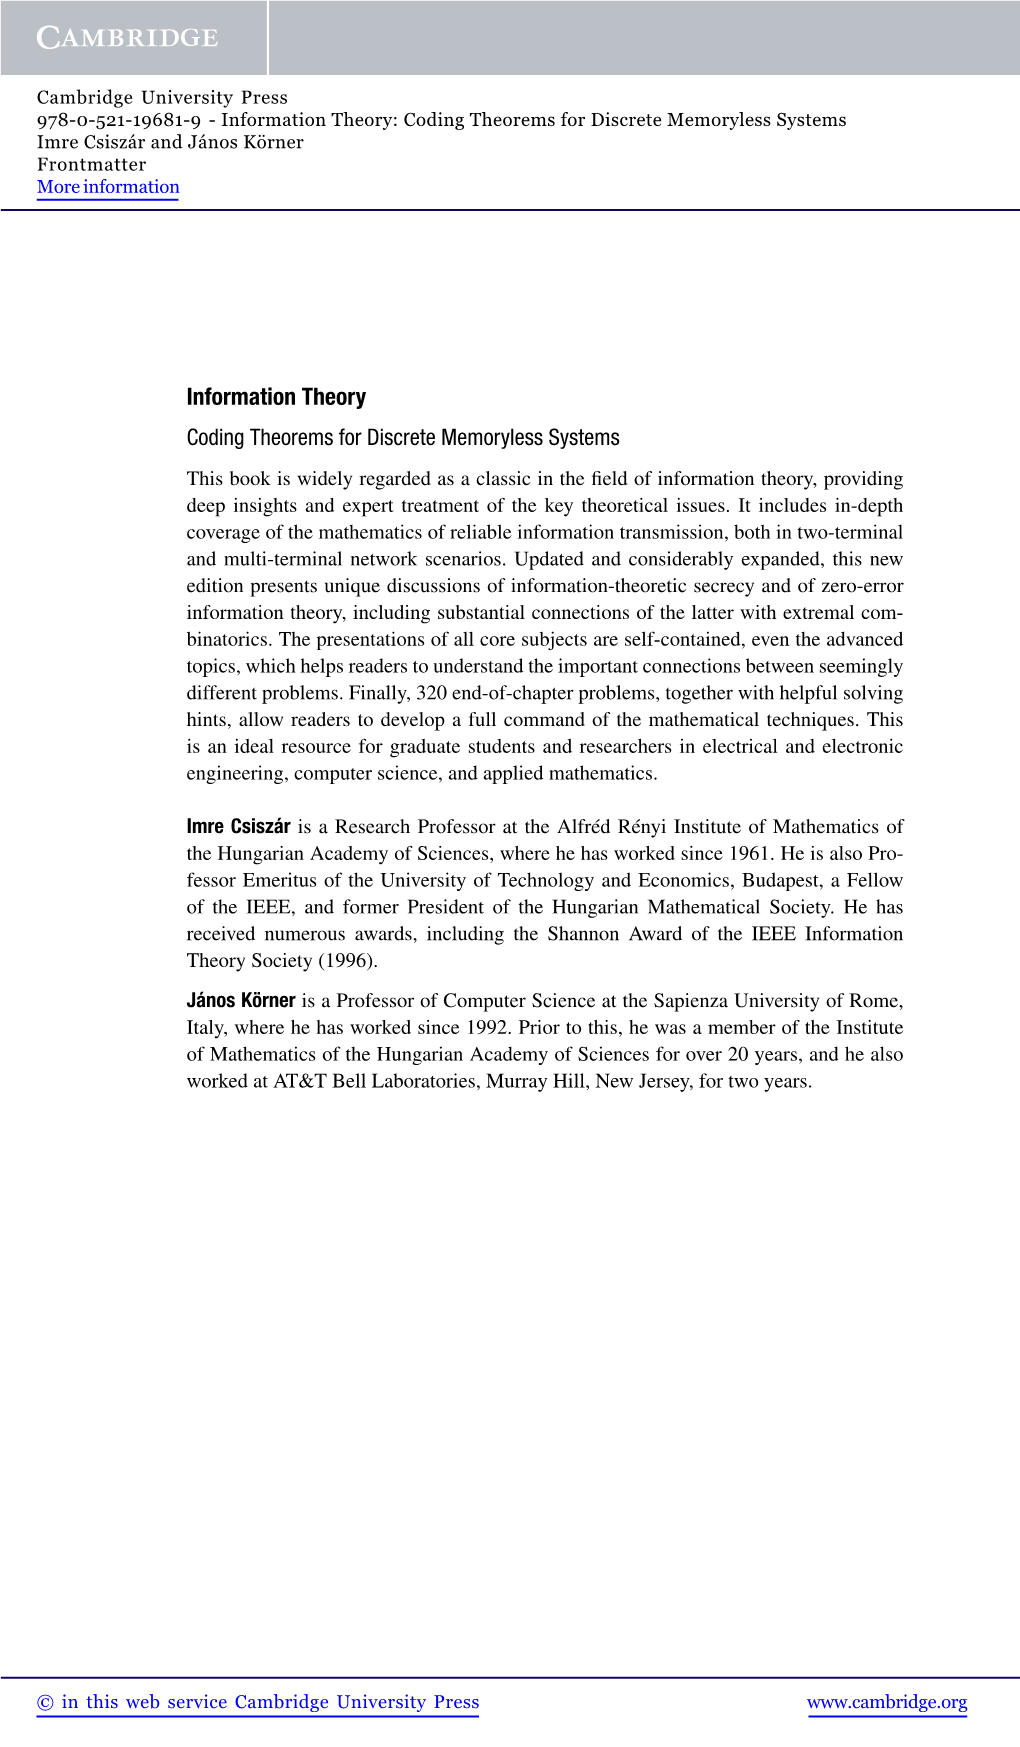 Information Theory: Coding Theorems for Discrete Memoryless Systems Imre Csiszár and János Körner Frontmatter More Information